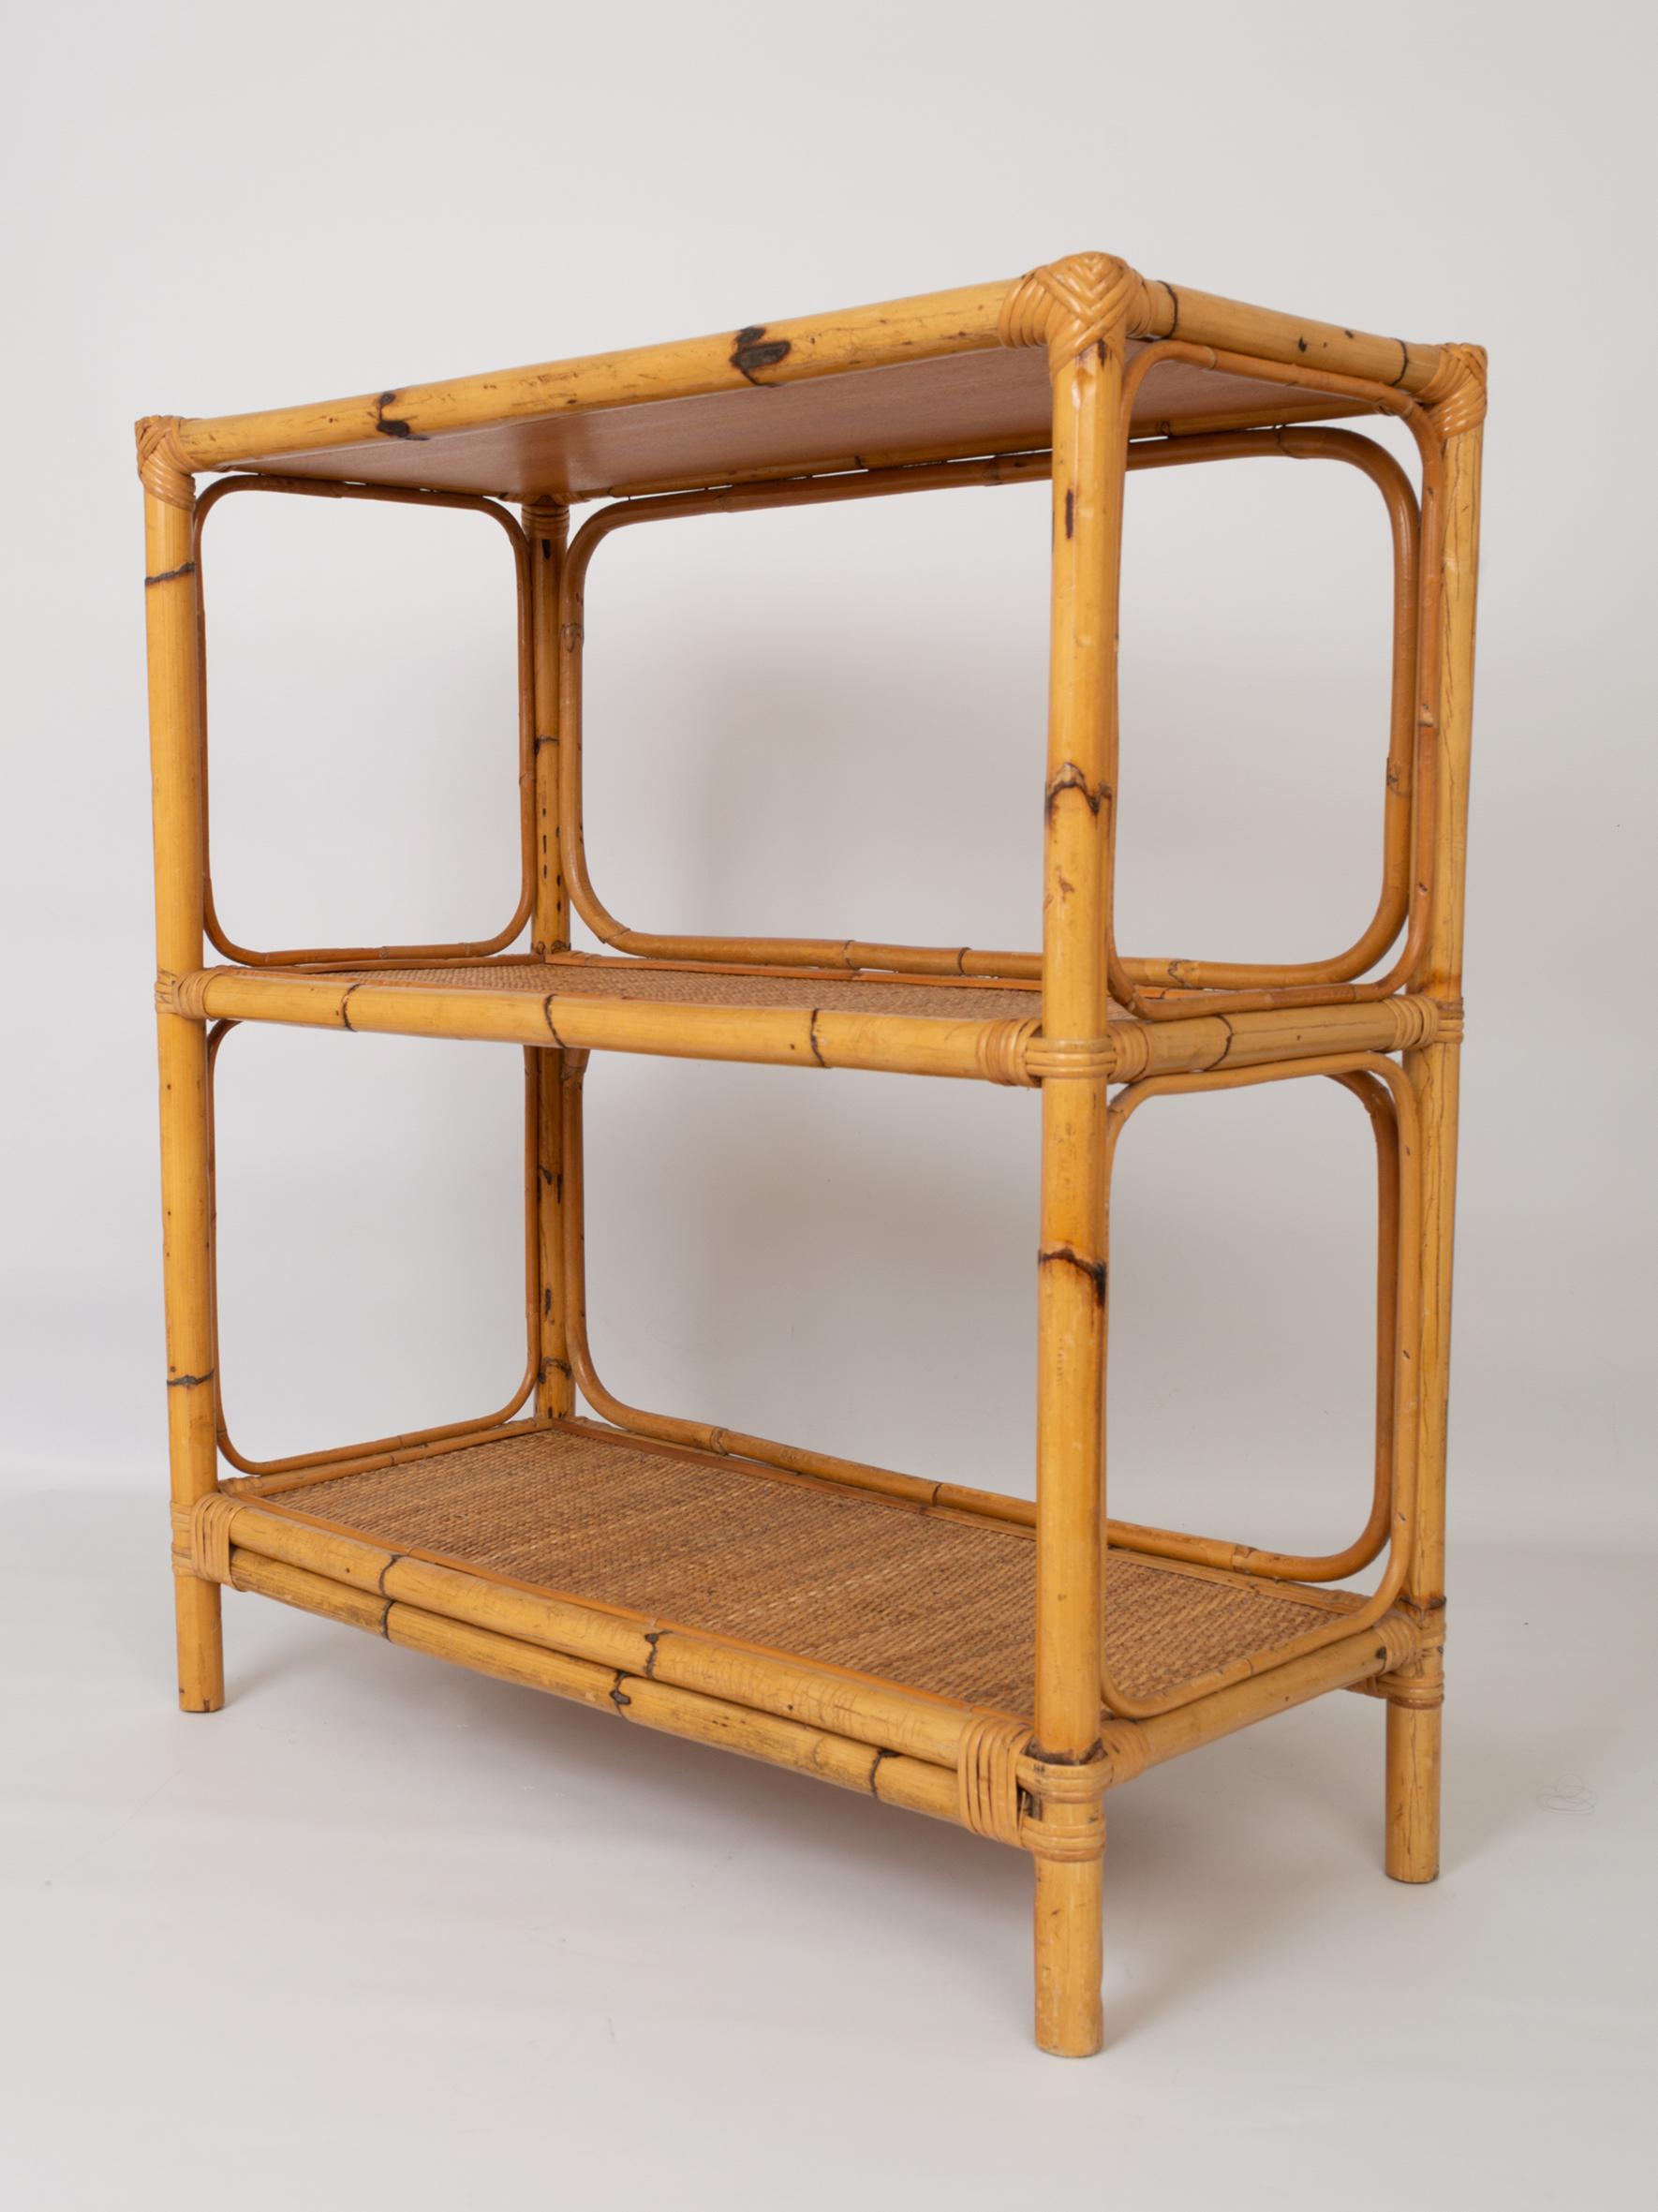 A Mid Century bamboo and rattan three-tier Italian étagère (shelves) dating from the 1960s.
In excellent condition commensurate of age.